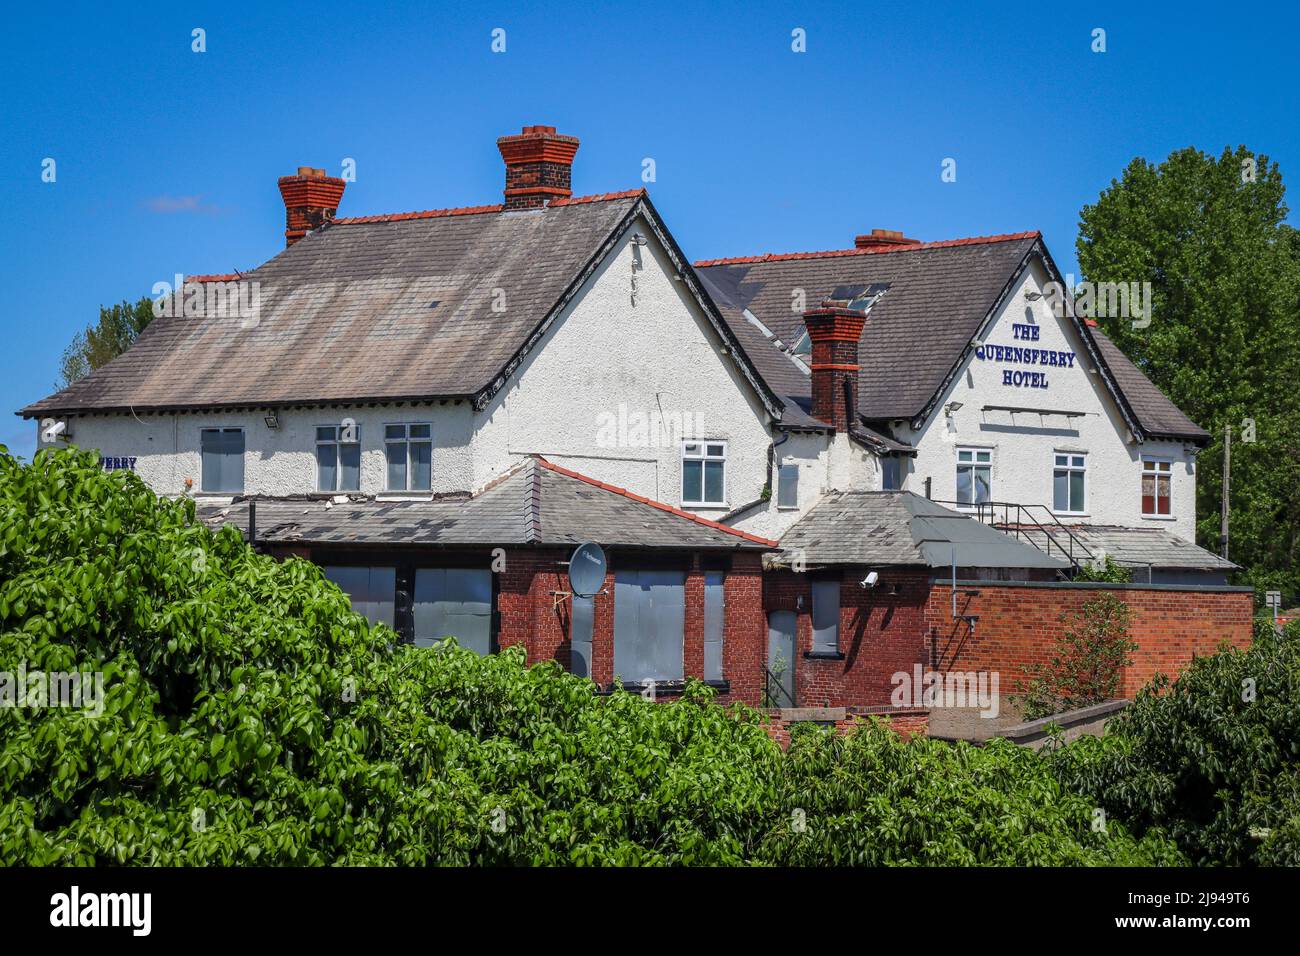 The Queensferry Hotel, abandoned derelict building, Garden City, North Wales Stock Photo